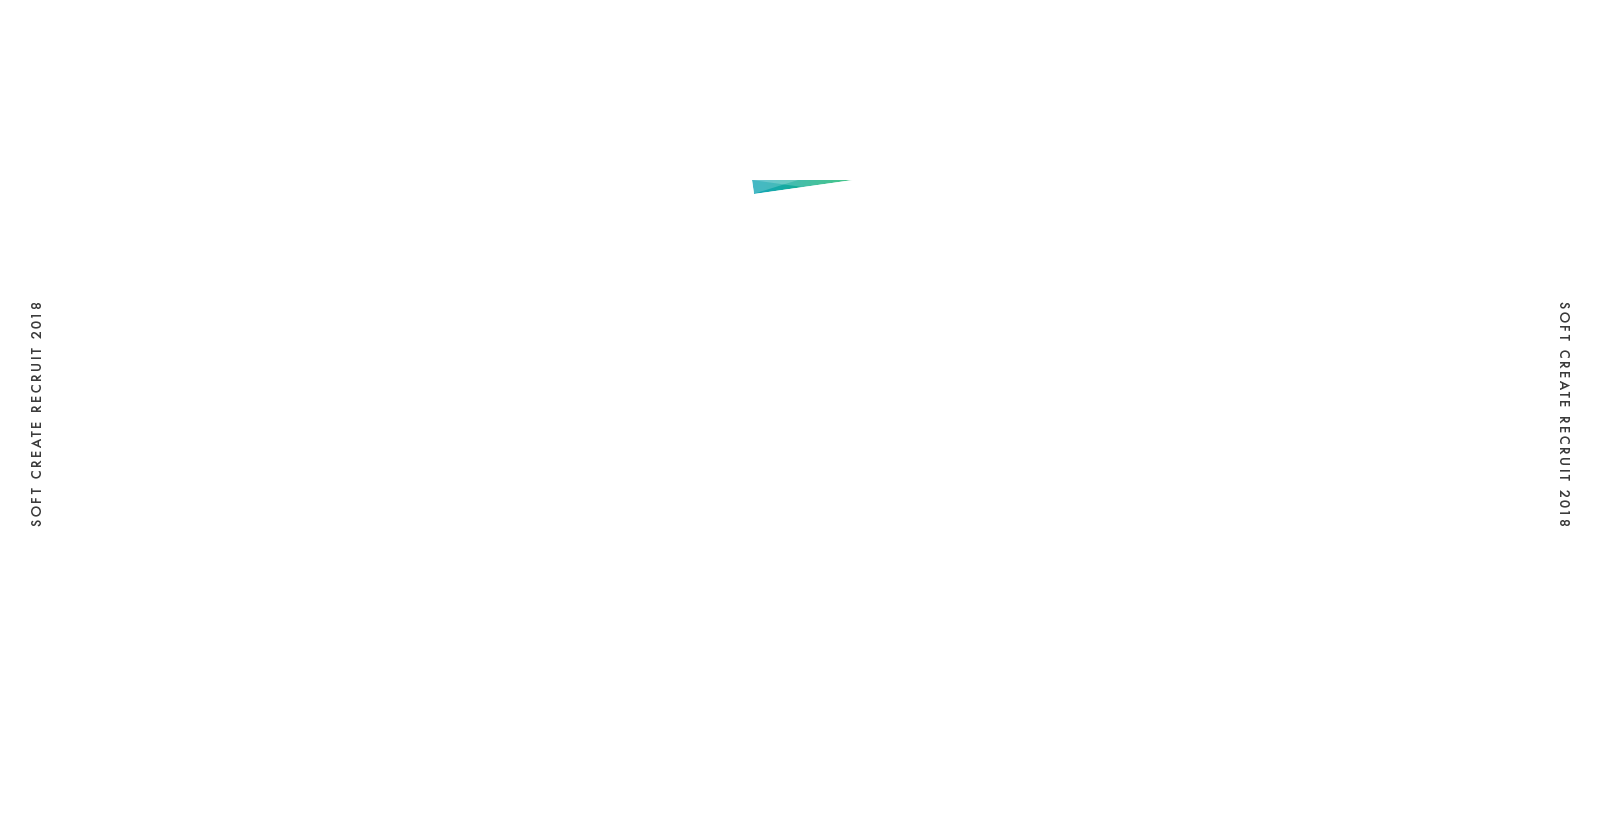 SOFT CREATE RECRUIT 2018 会社を変えるのは君だ。 Change the company with your challenge